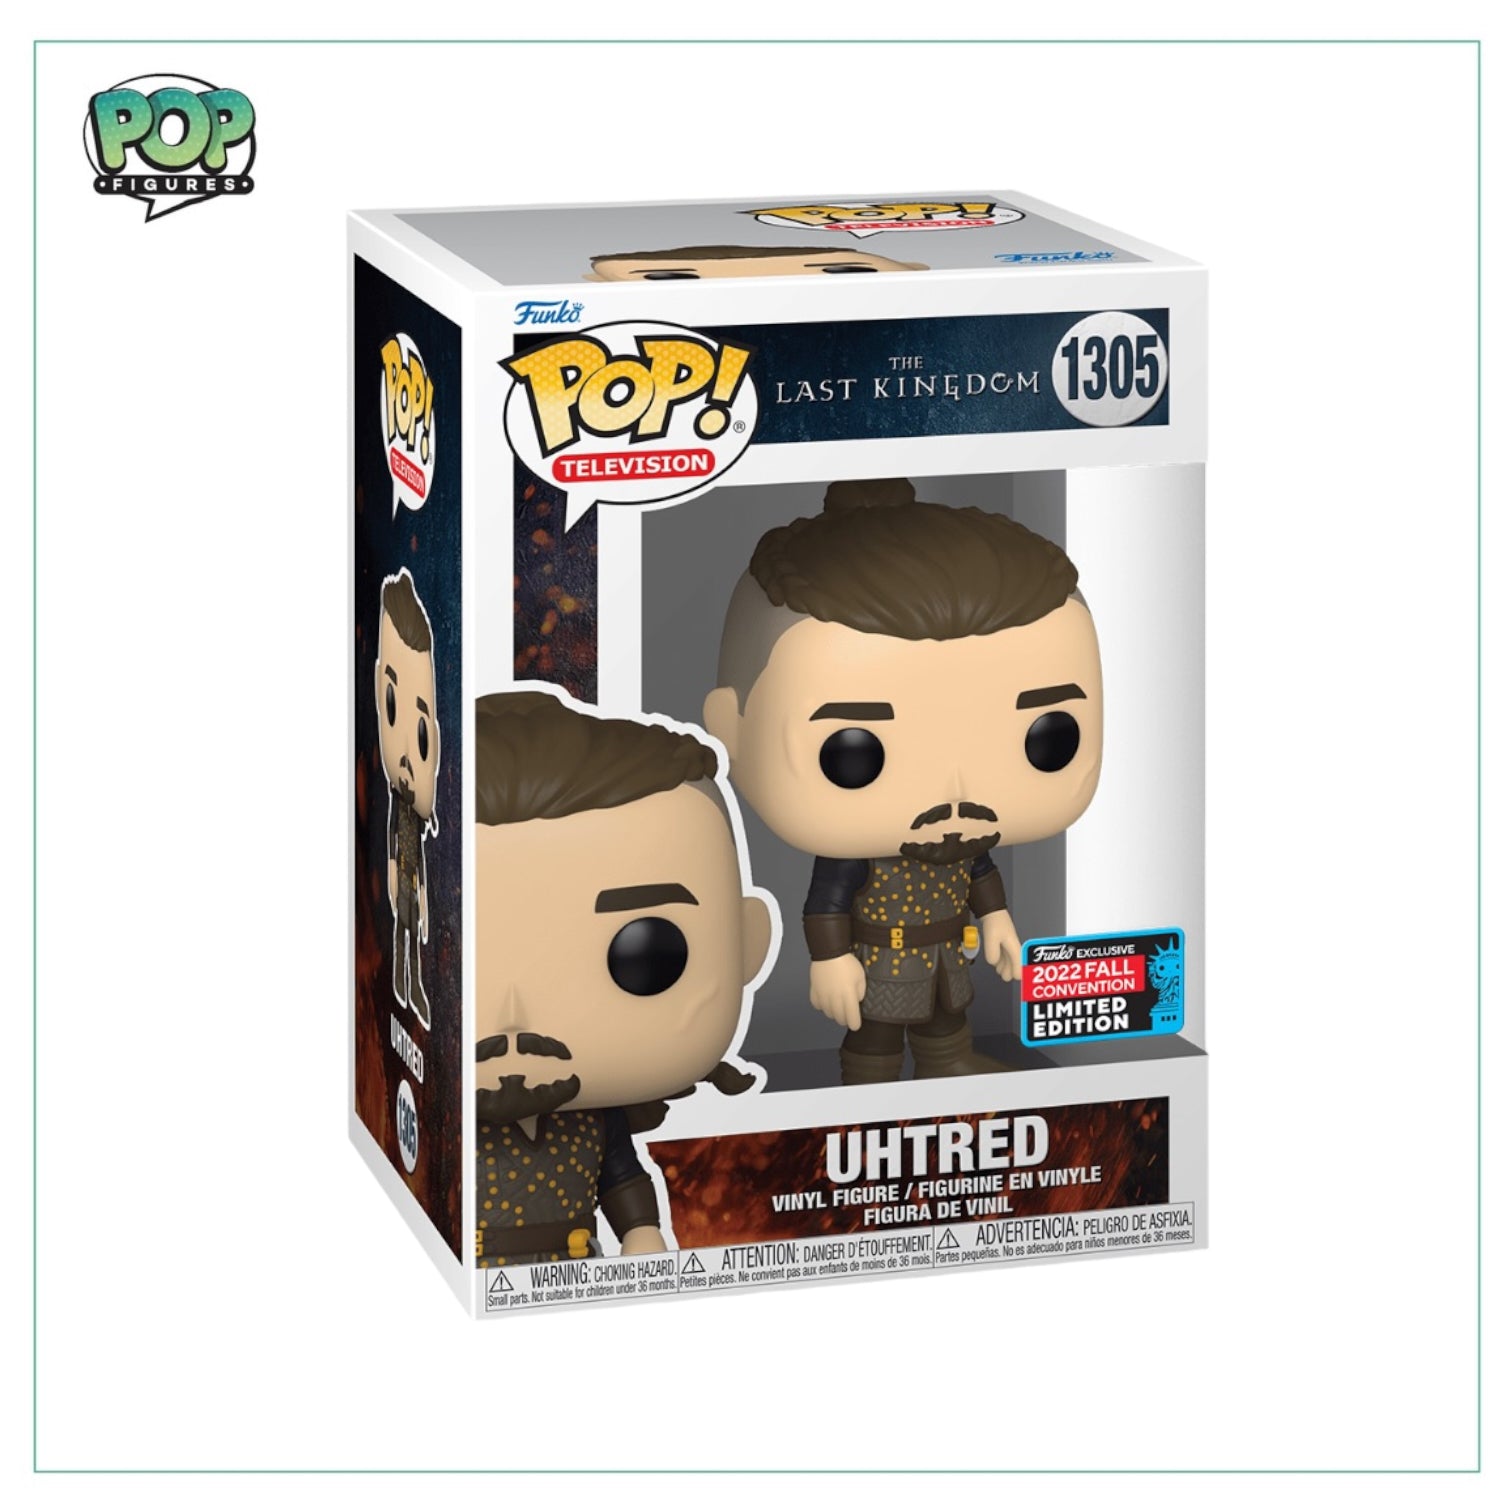 Uhtred #1305 Funko Pop! - The Last Kingdom - 2022 Fall Convention - Angry Cat